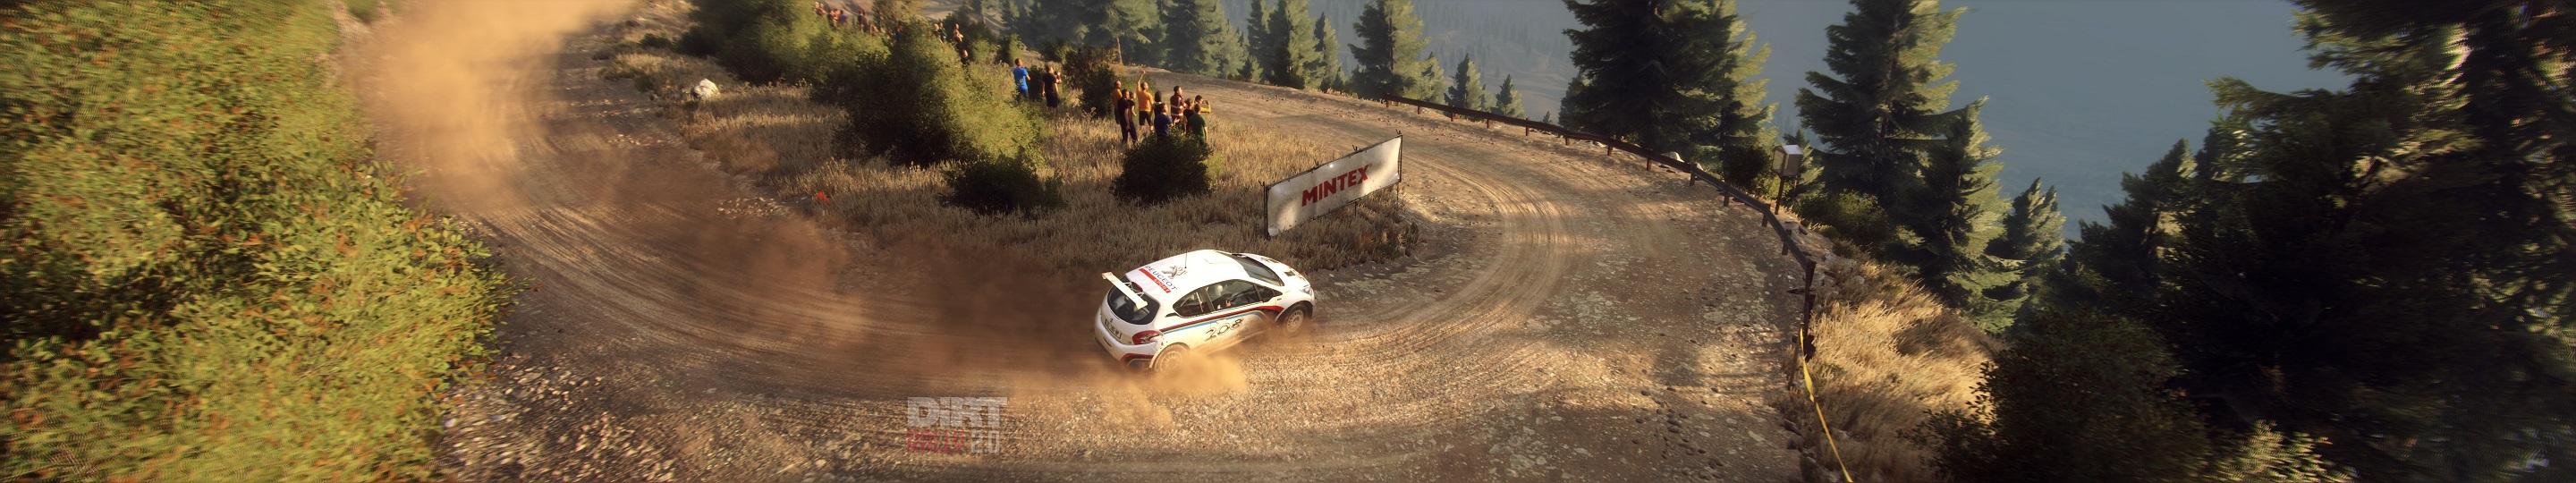 1 DIRT RALLY 2 GREECE with R5 PEUGEOT copy.jpg